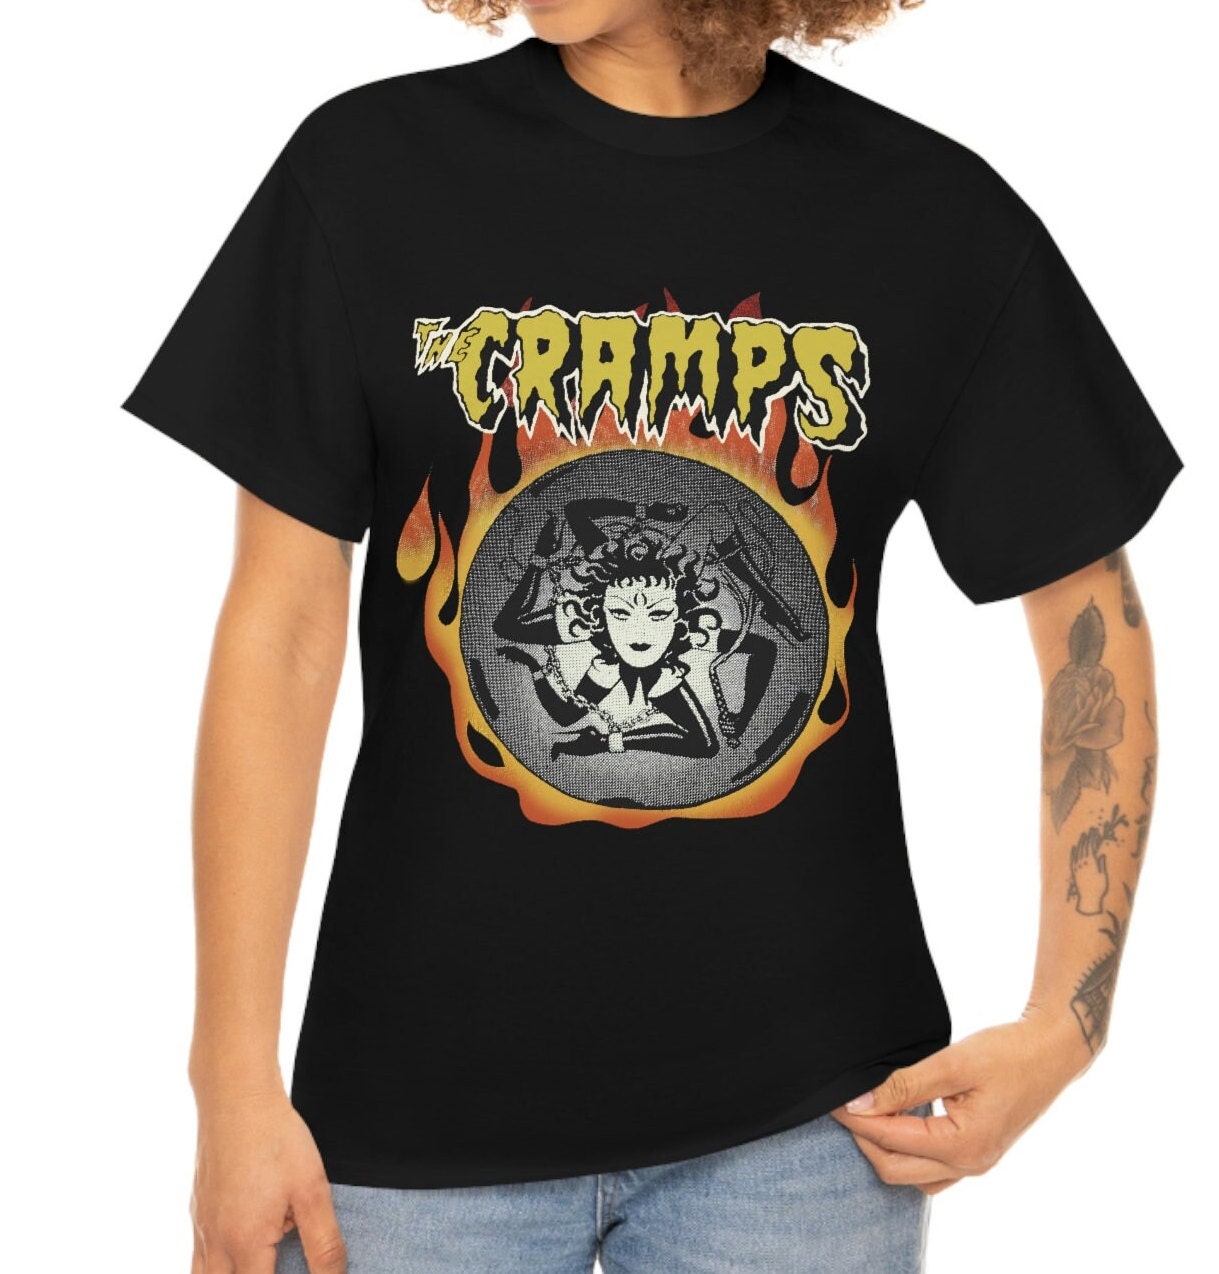 Discover Vintage The Cramps Halloween party 88 Tee ,Vintage 1980s The Cramps Tees